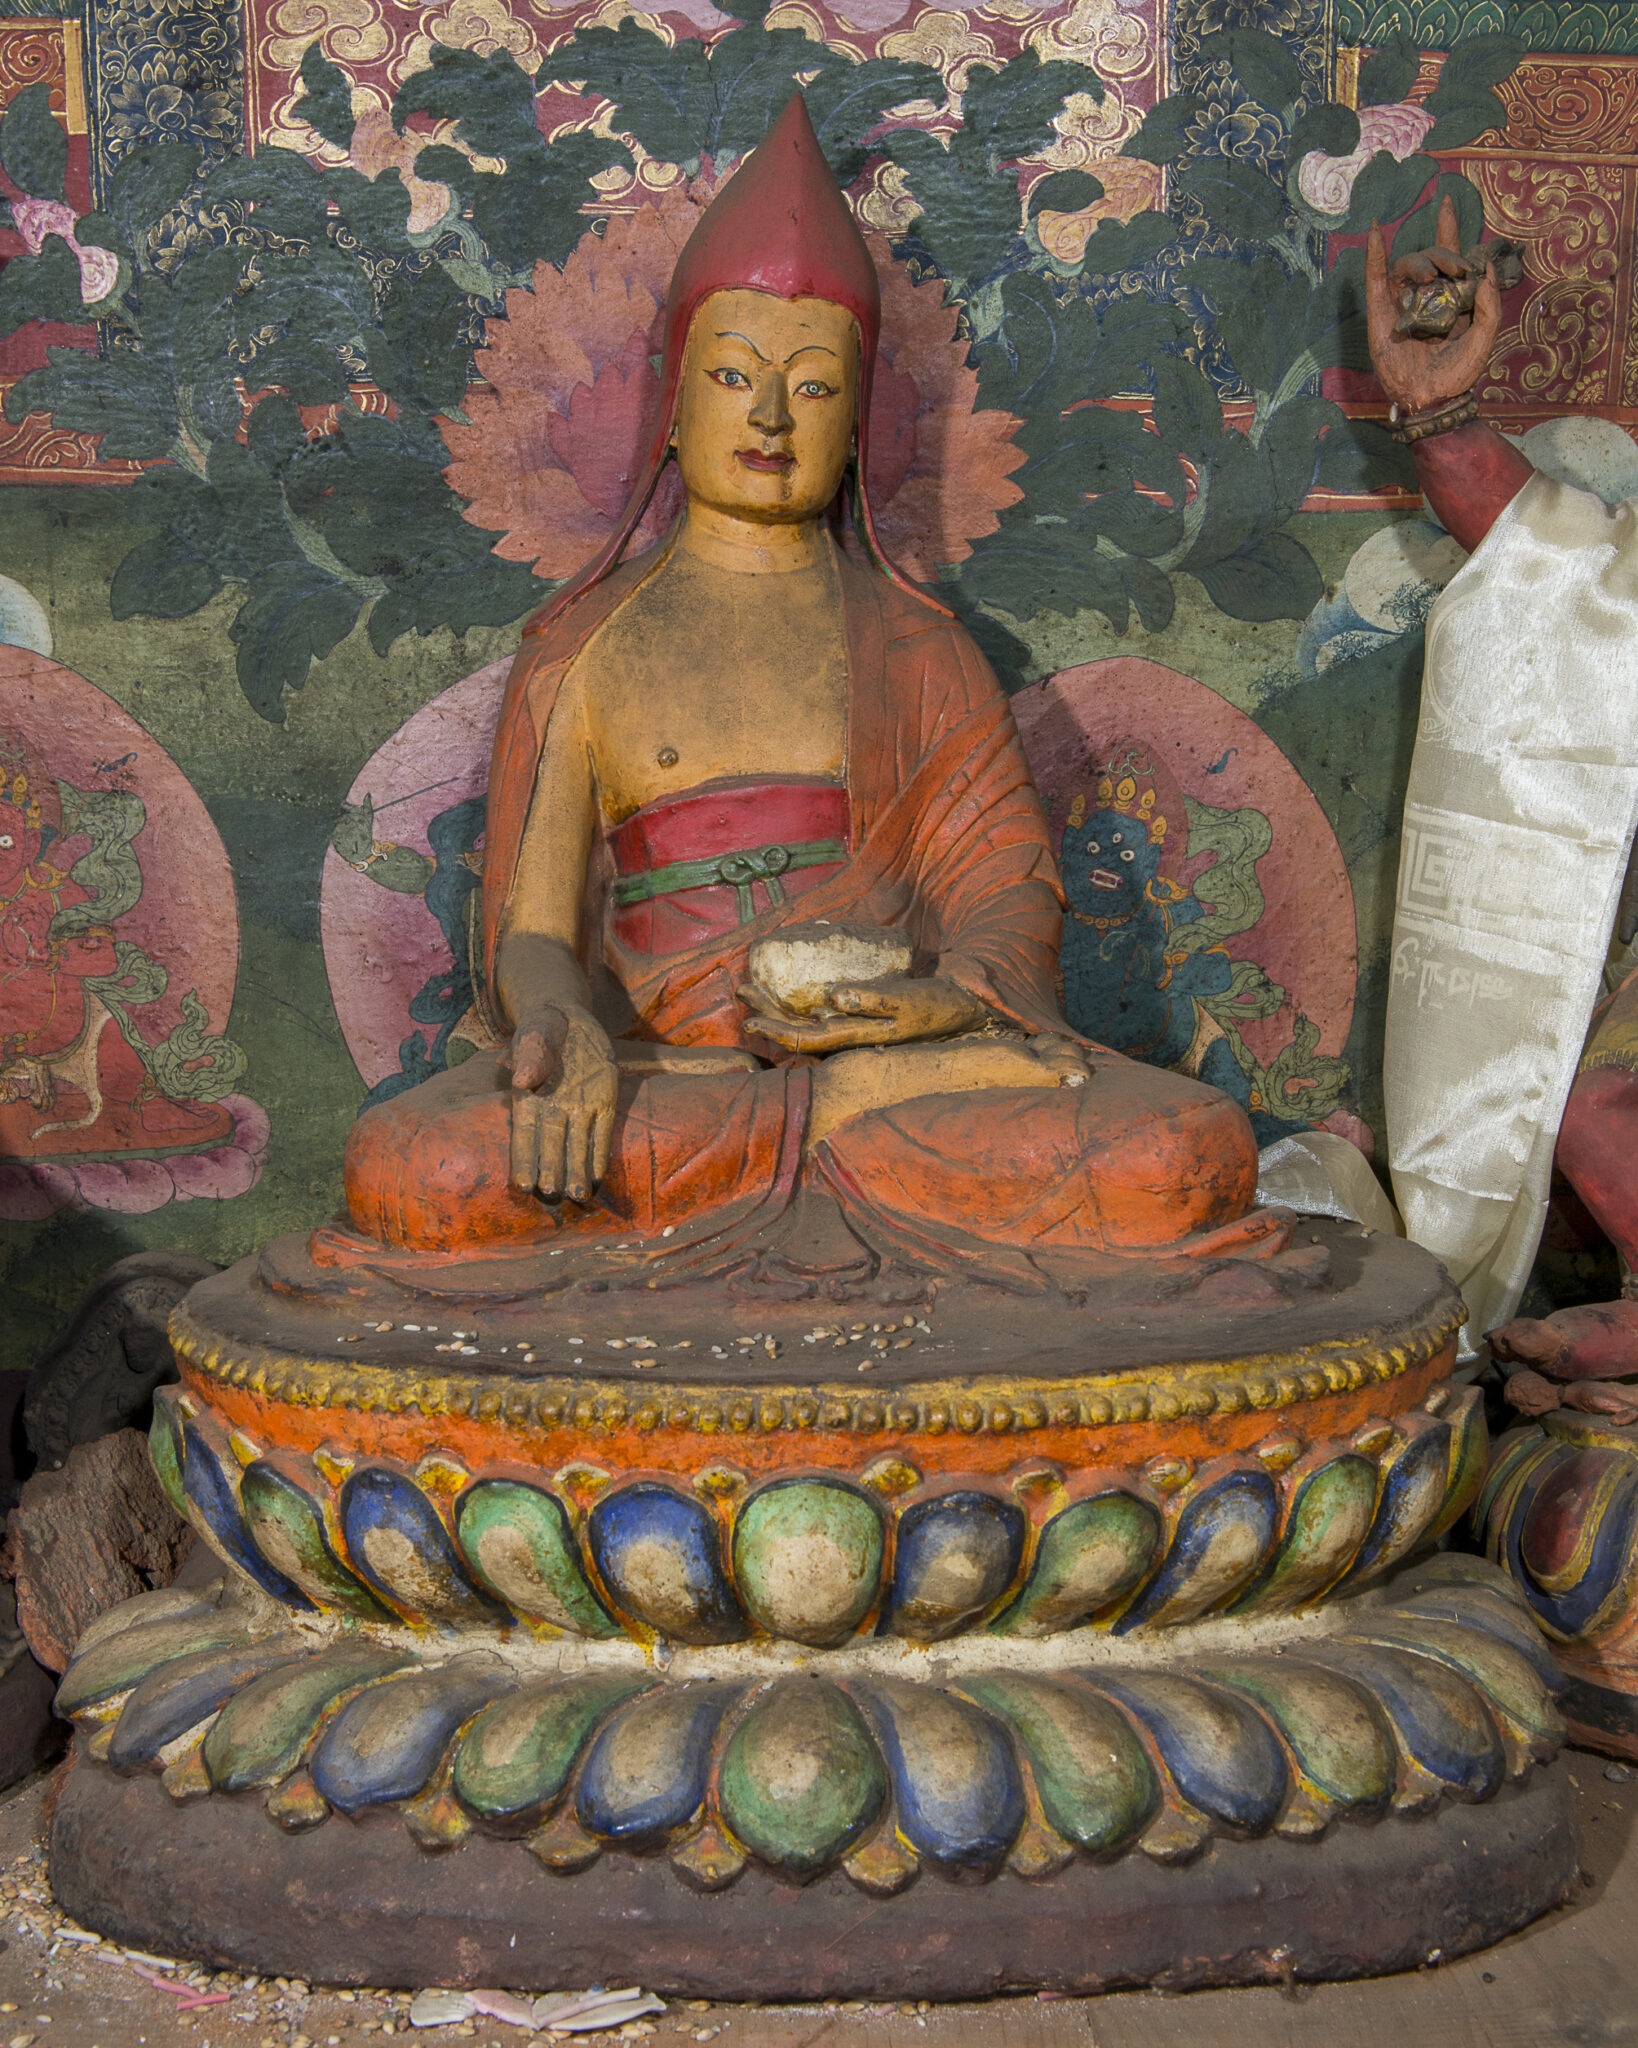 Sculpture depicting figure wearing saffron robe and pointed red headdress seated on lotus pedestal before mural